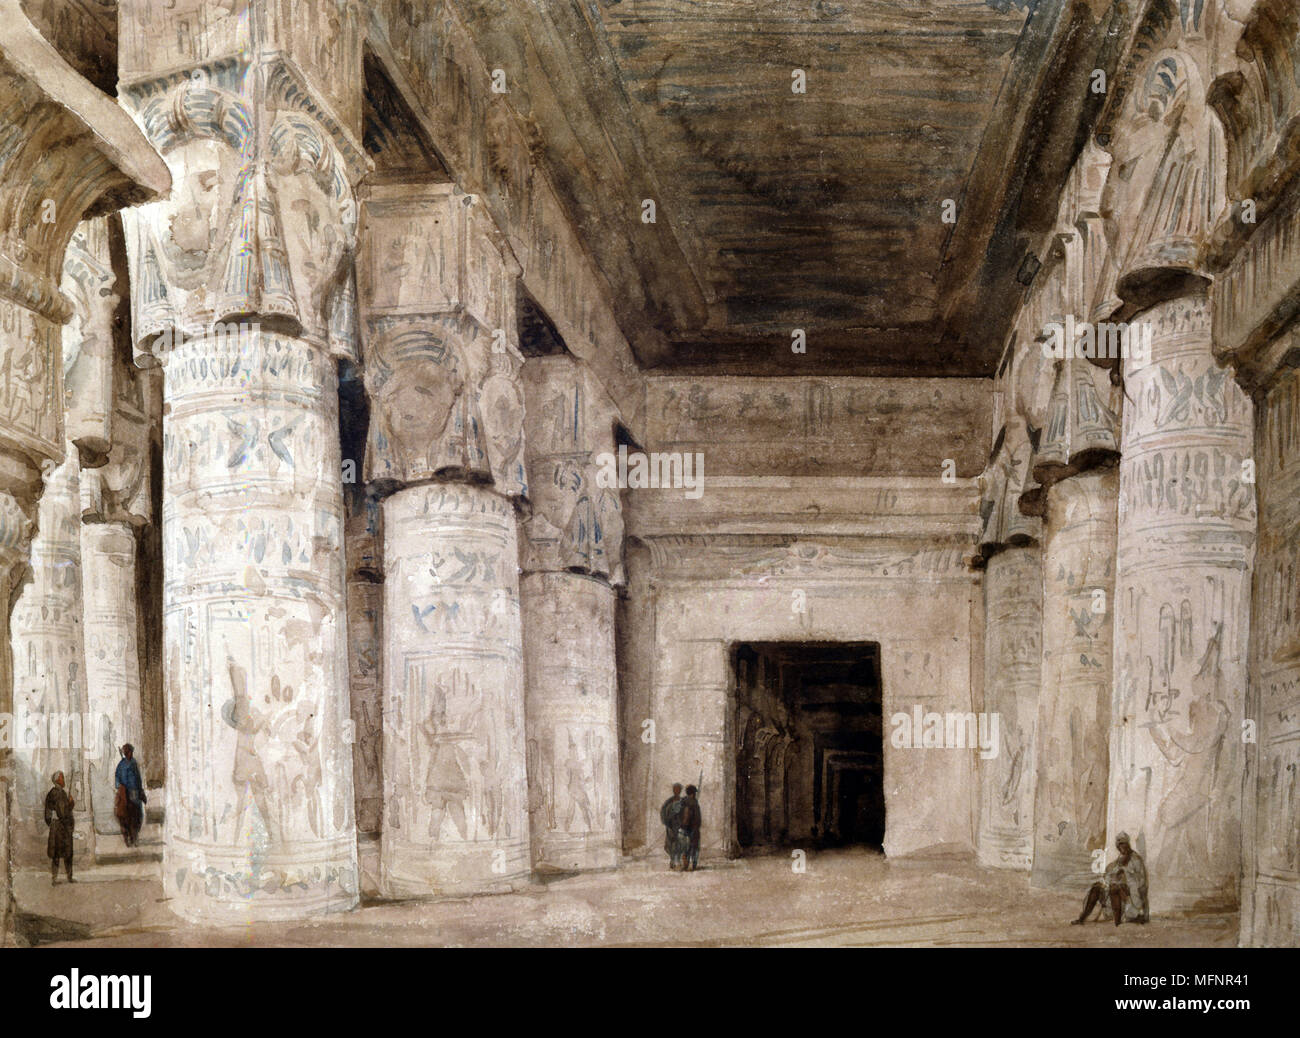 Dendera Interior'. Hector Horeau (1801-1872) French architect. Great Hall of the Temple of Hathor, showing the decorated columns. Dendera, Egypt. Archaeology Architecture Religion Mythology Ancient Egyptian Stock Photo